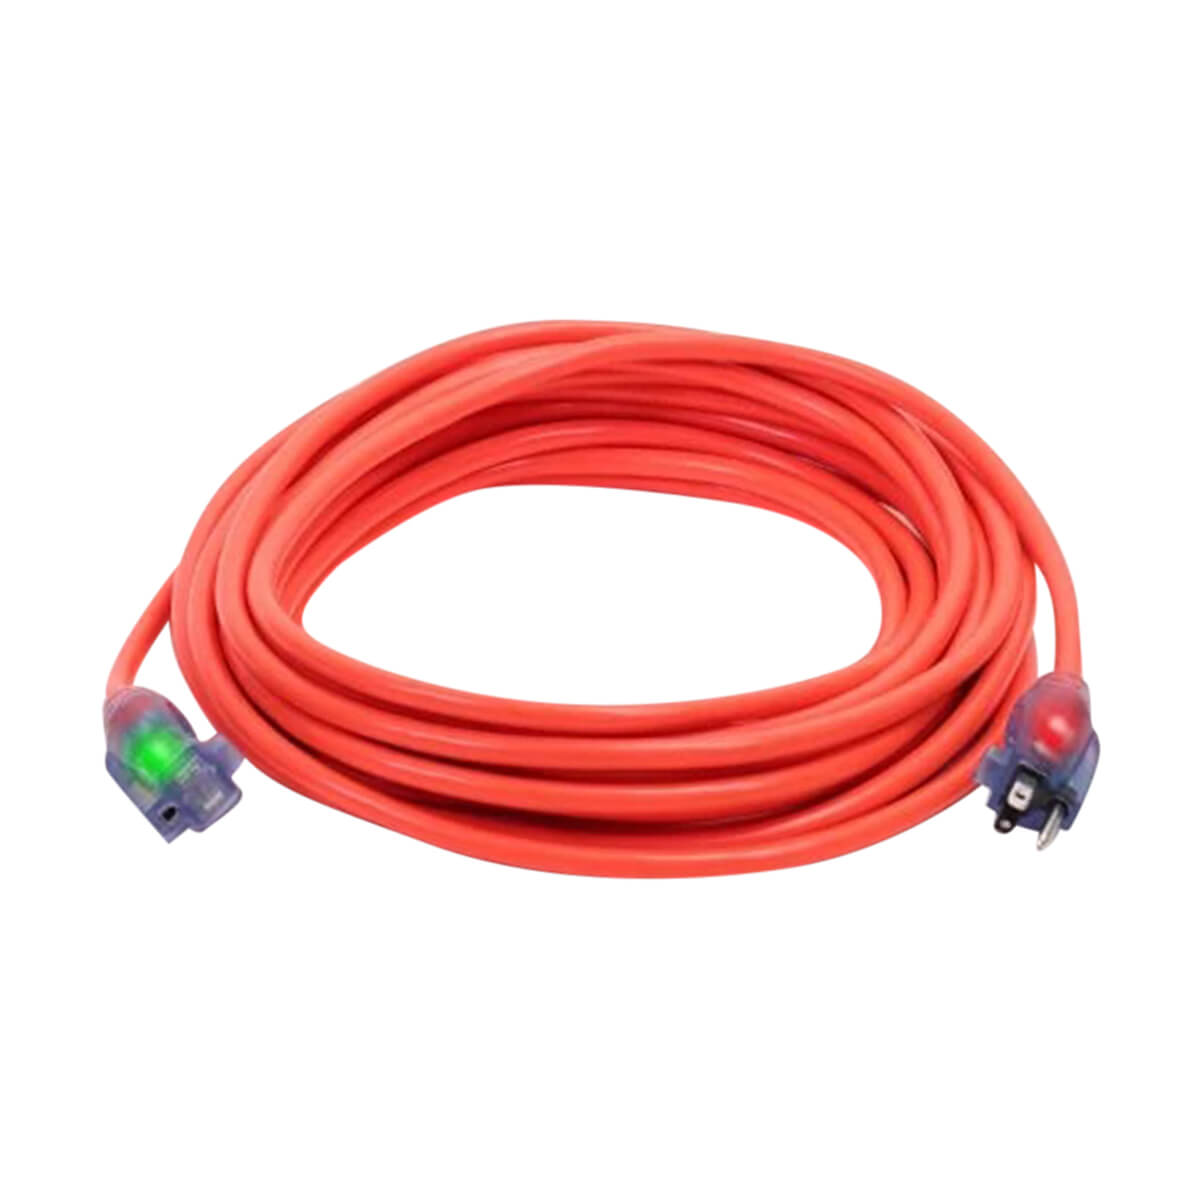 25' Pro Glo® 14/3 SJTW (300V) Extension Cords (CGM)